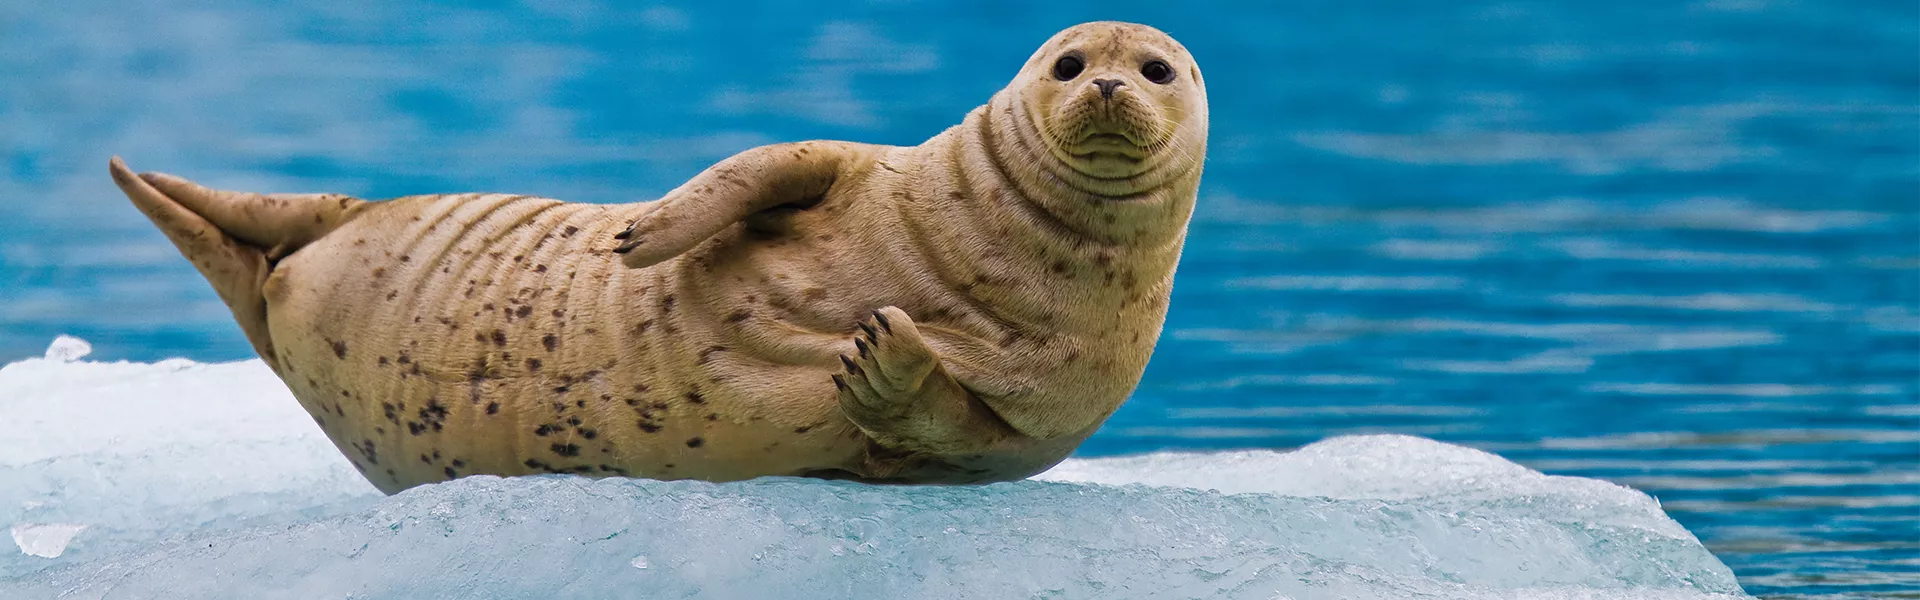 A seal sitting on top of an ice floet